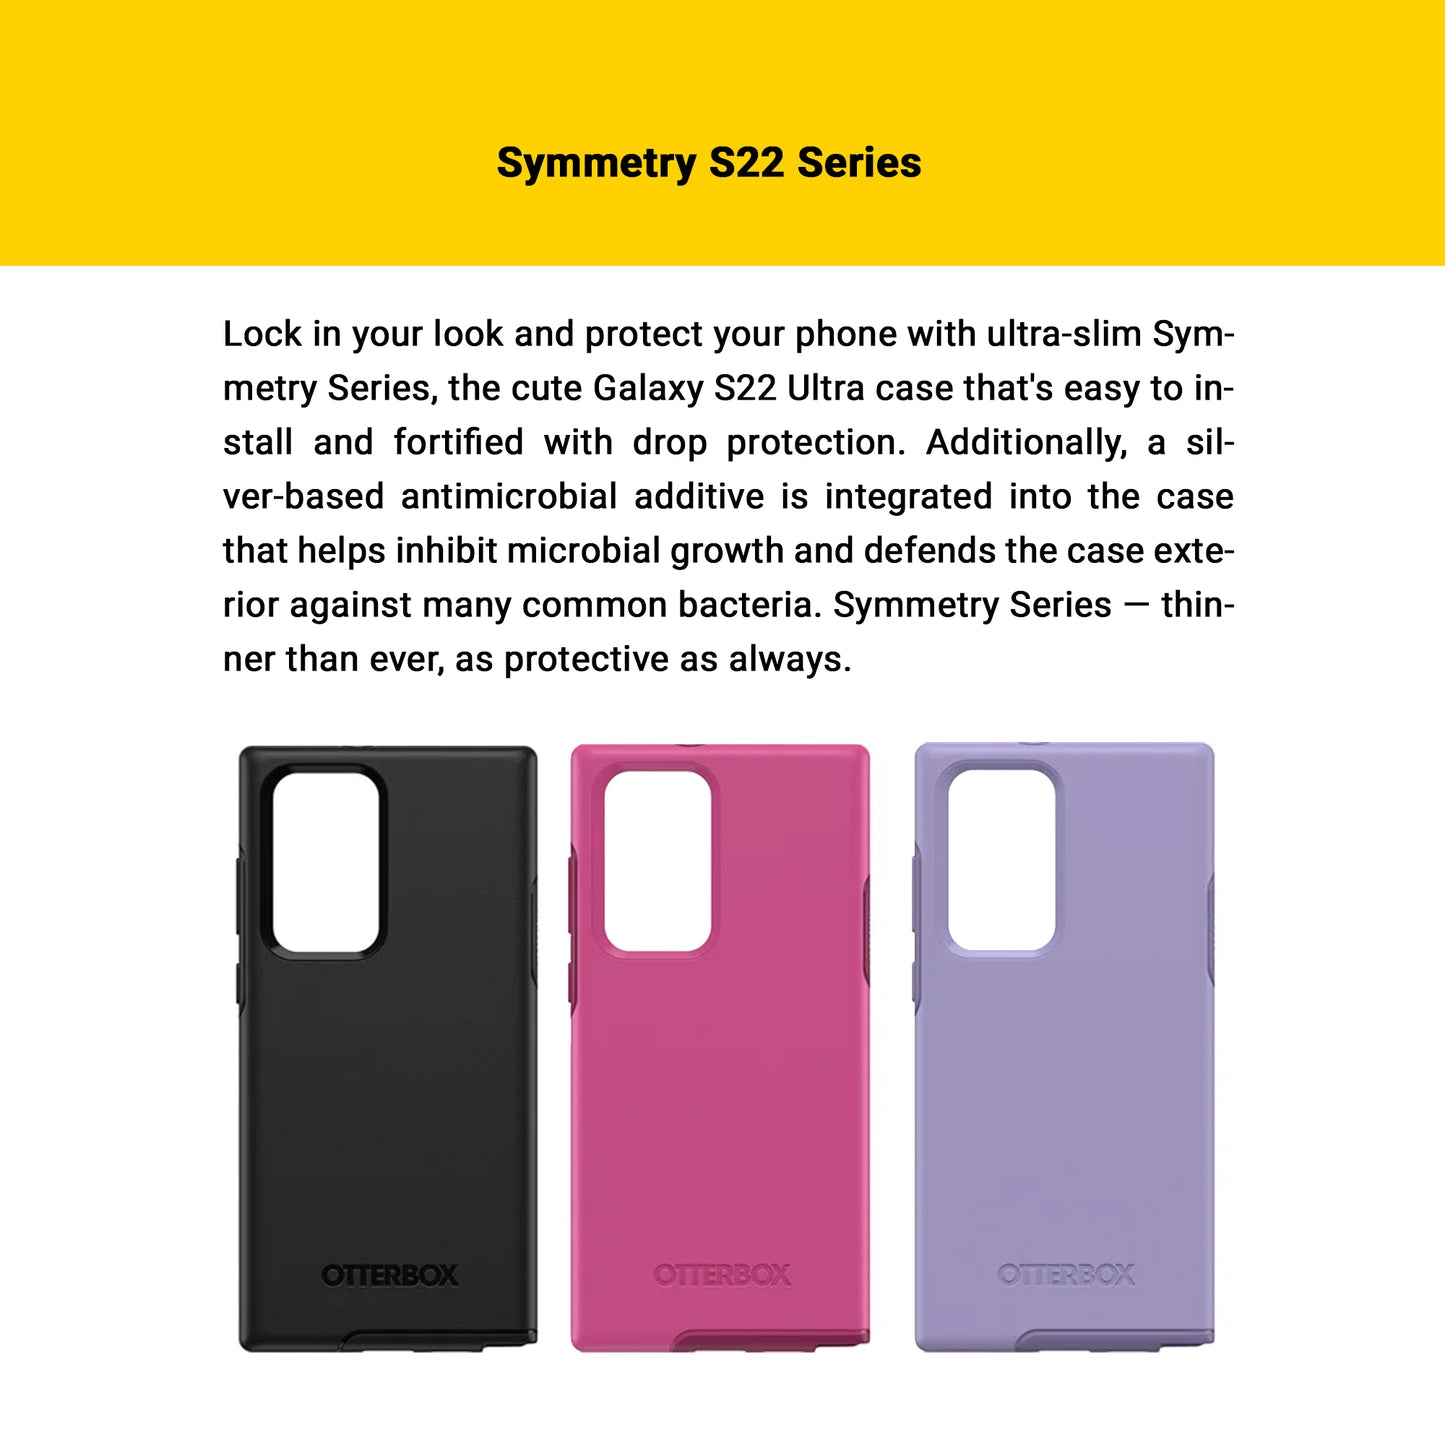 Otterbox Symmetry Series Case for Samsung Galaxy S22 Ultra - Reset Purple (Barcode: 840104296004 )